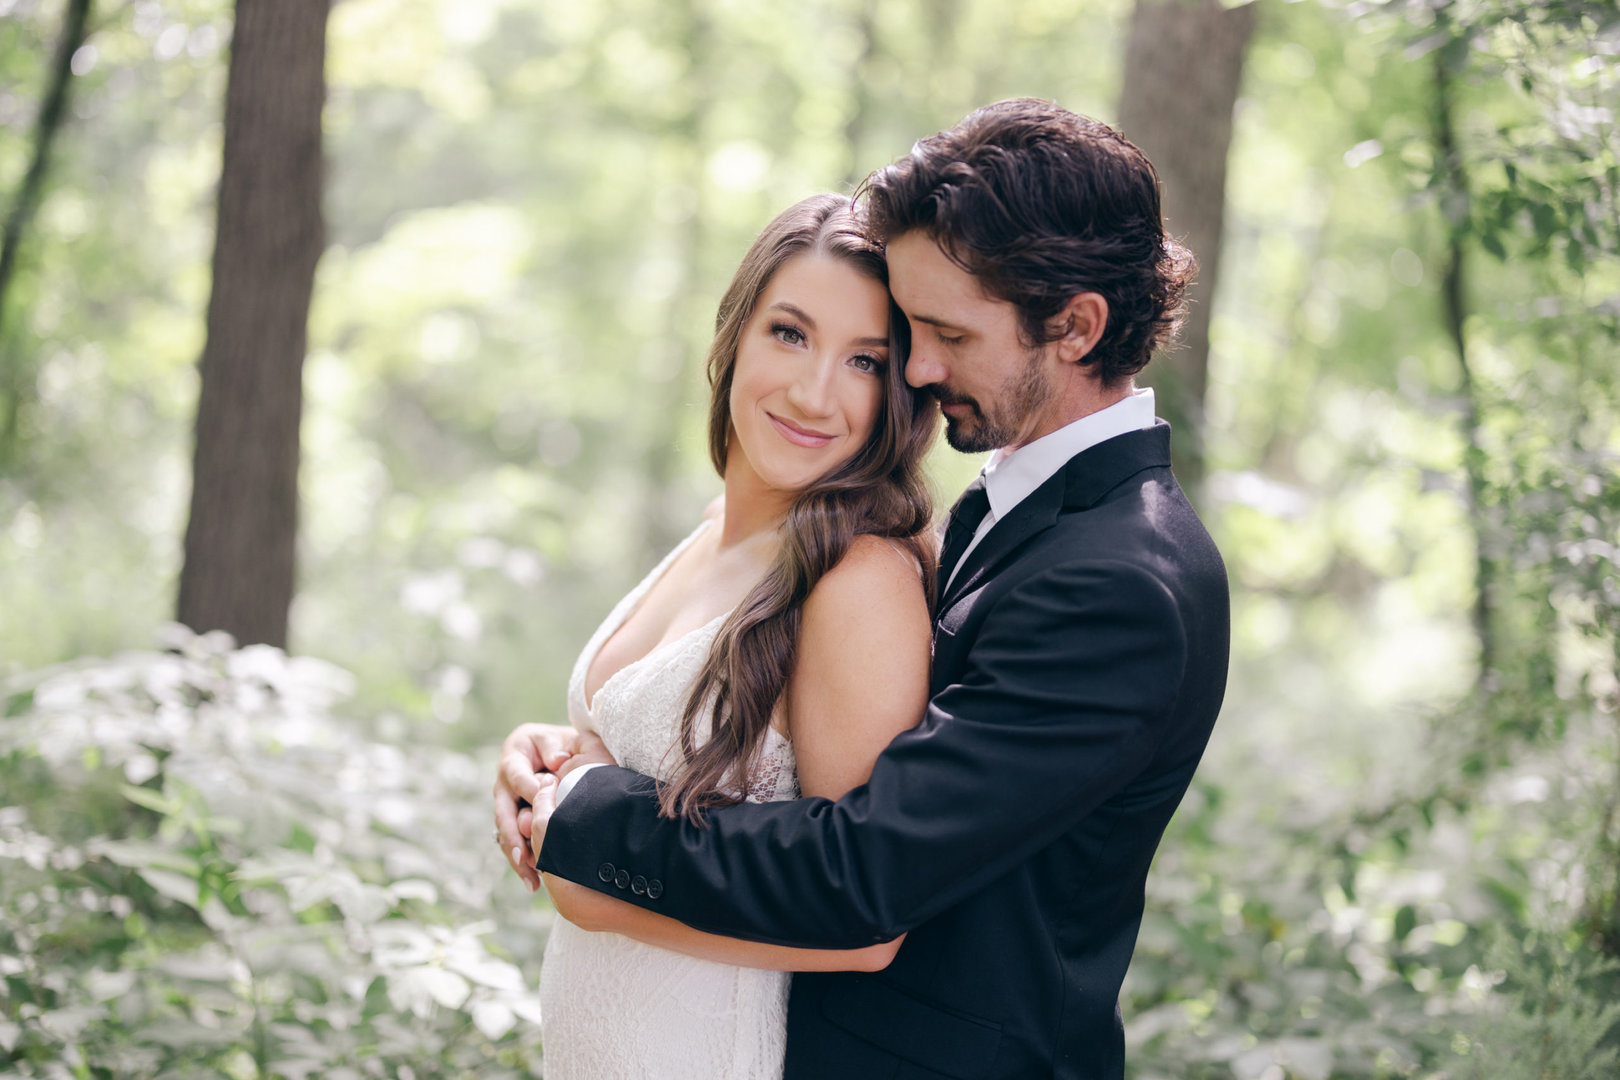 bride and groom portraits from their wedding at Kindred North by NWA Wedding Photography Benfield Photography out in the woods surrounding the centerton wedding venue.